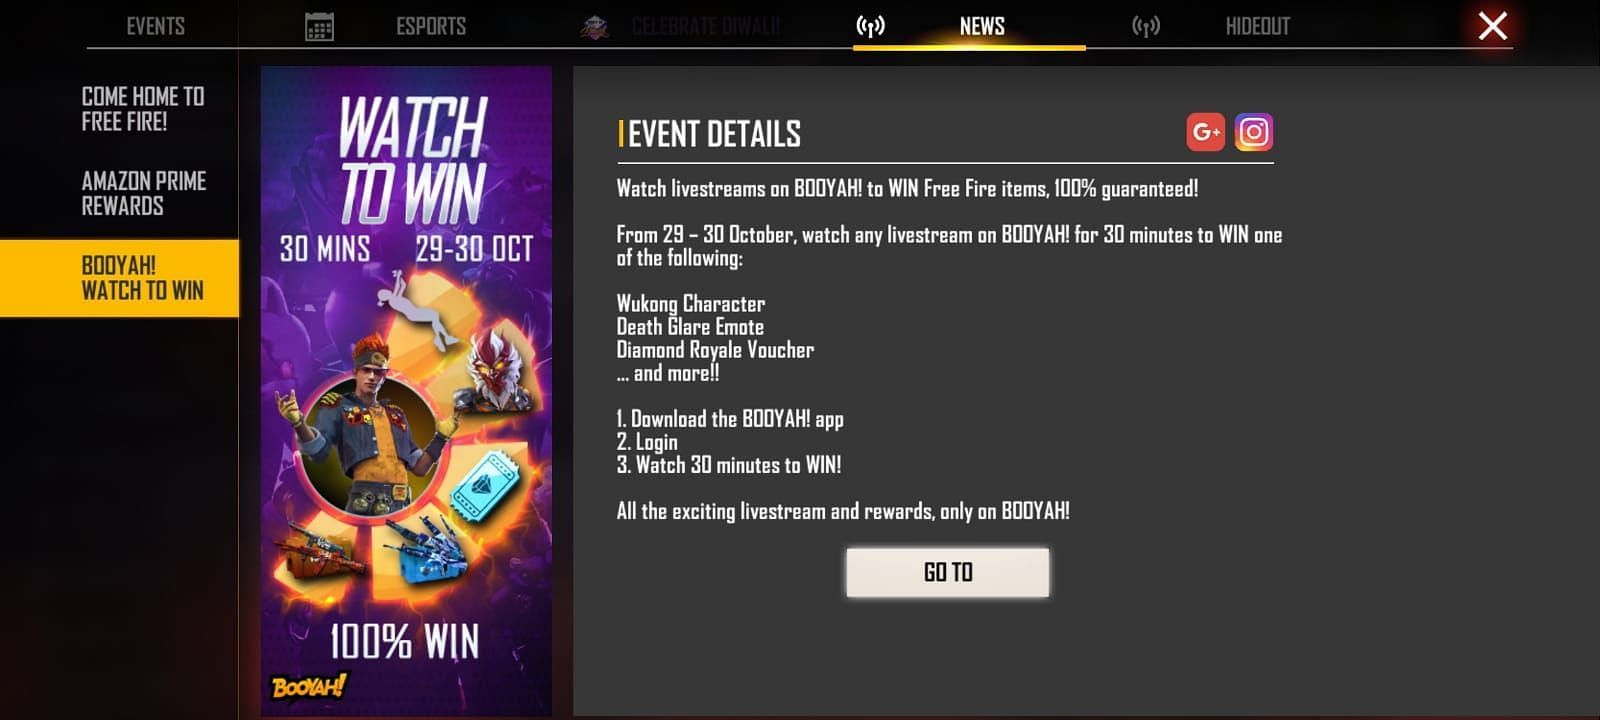 The new Watch to Win event offers exciting rewards (Image via Free Fire)